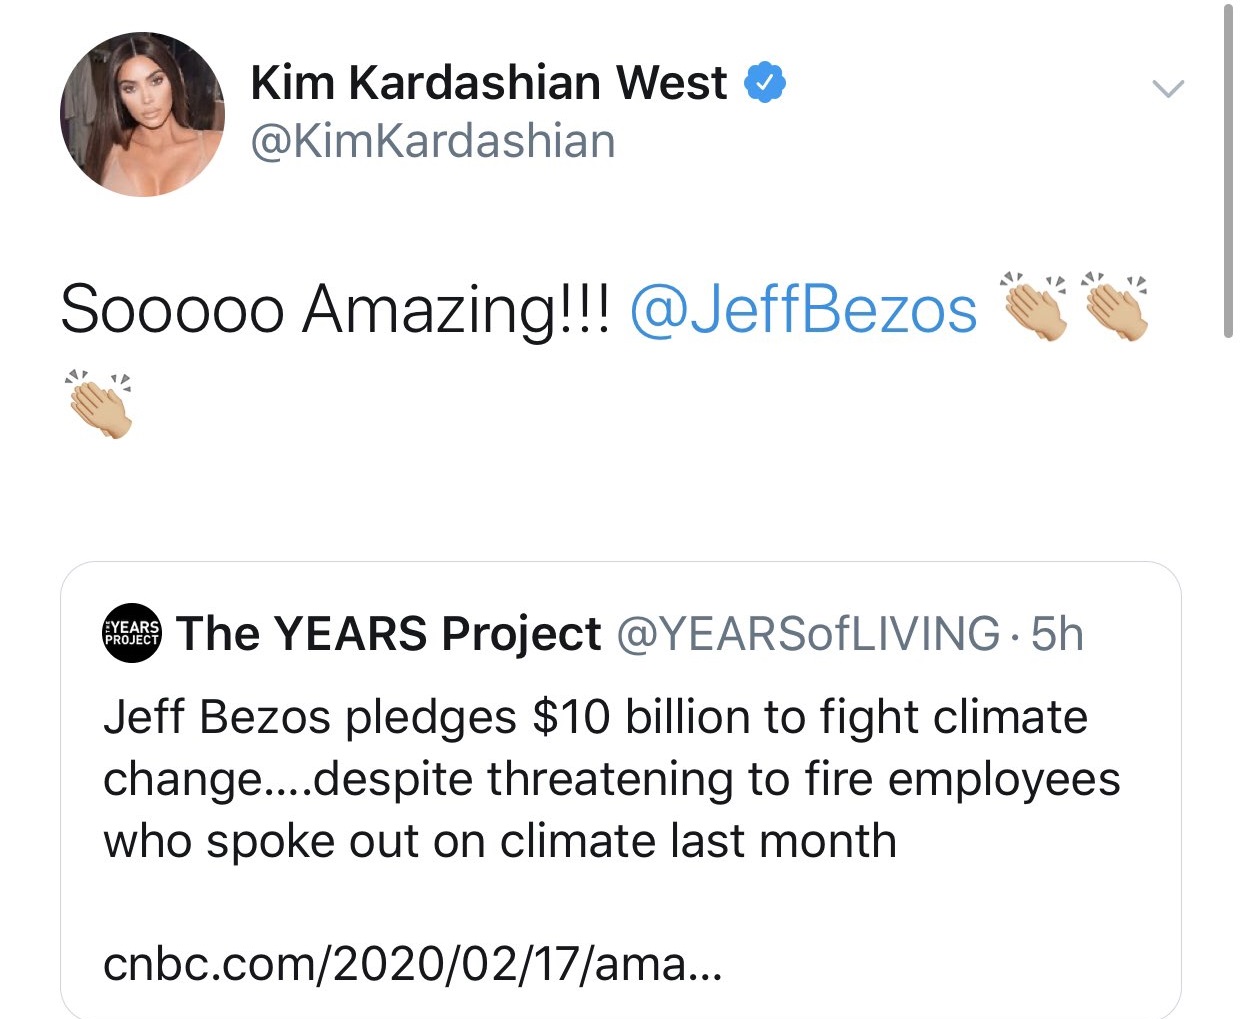 document - Kim Kardashian West Sooooo Amazing!!! Years Project Areas The Years Project Jeff Bezos pledges $10 billion to fight climate change....despite threatening to fire employees who spoke out on climate last month cnbc.comama...